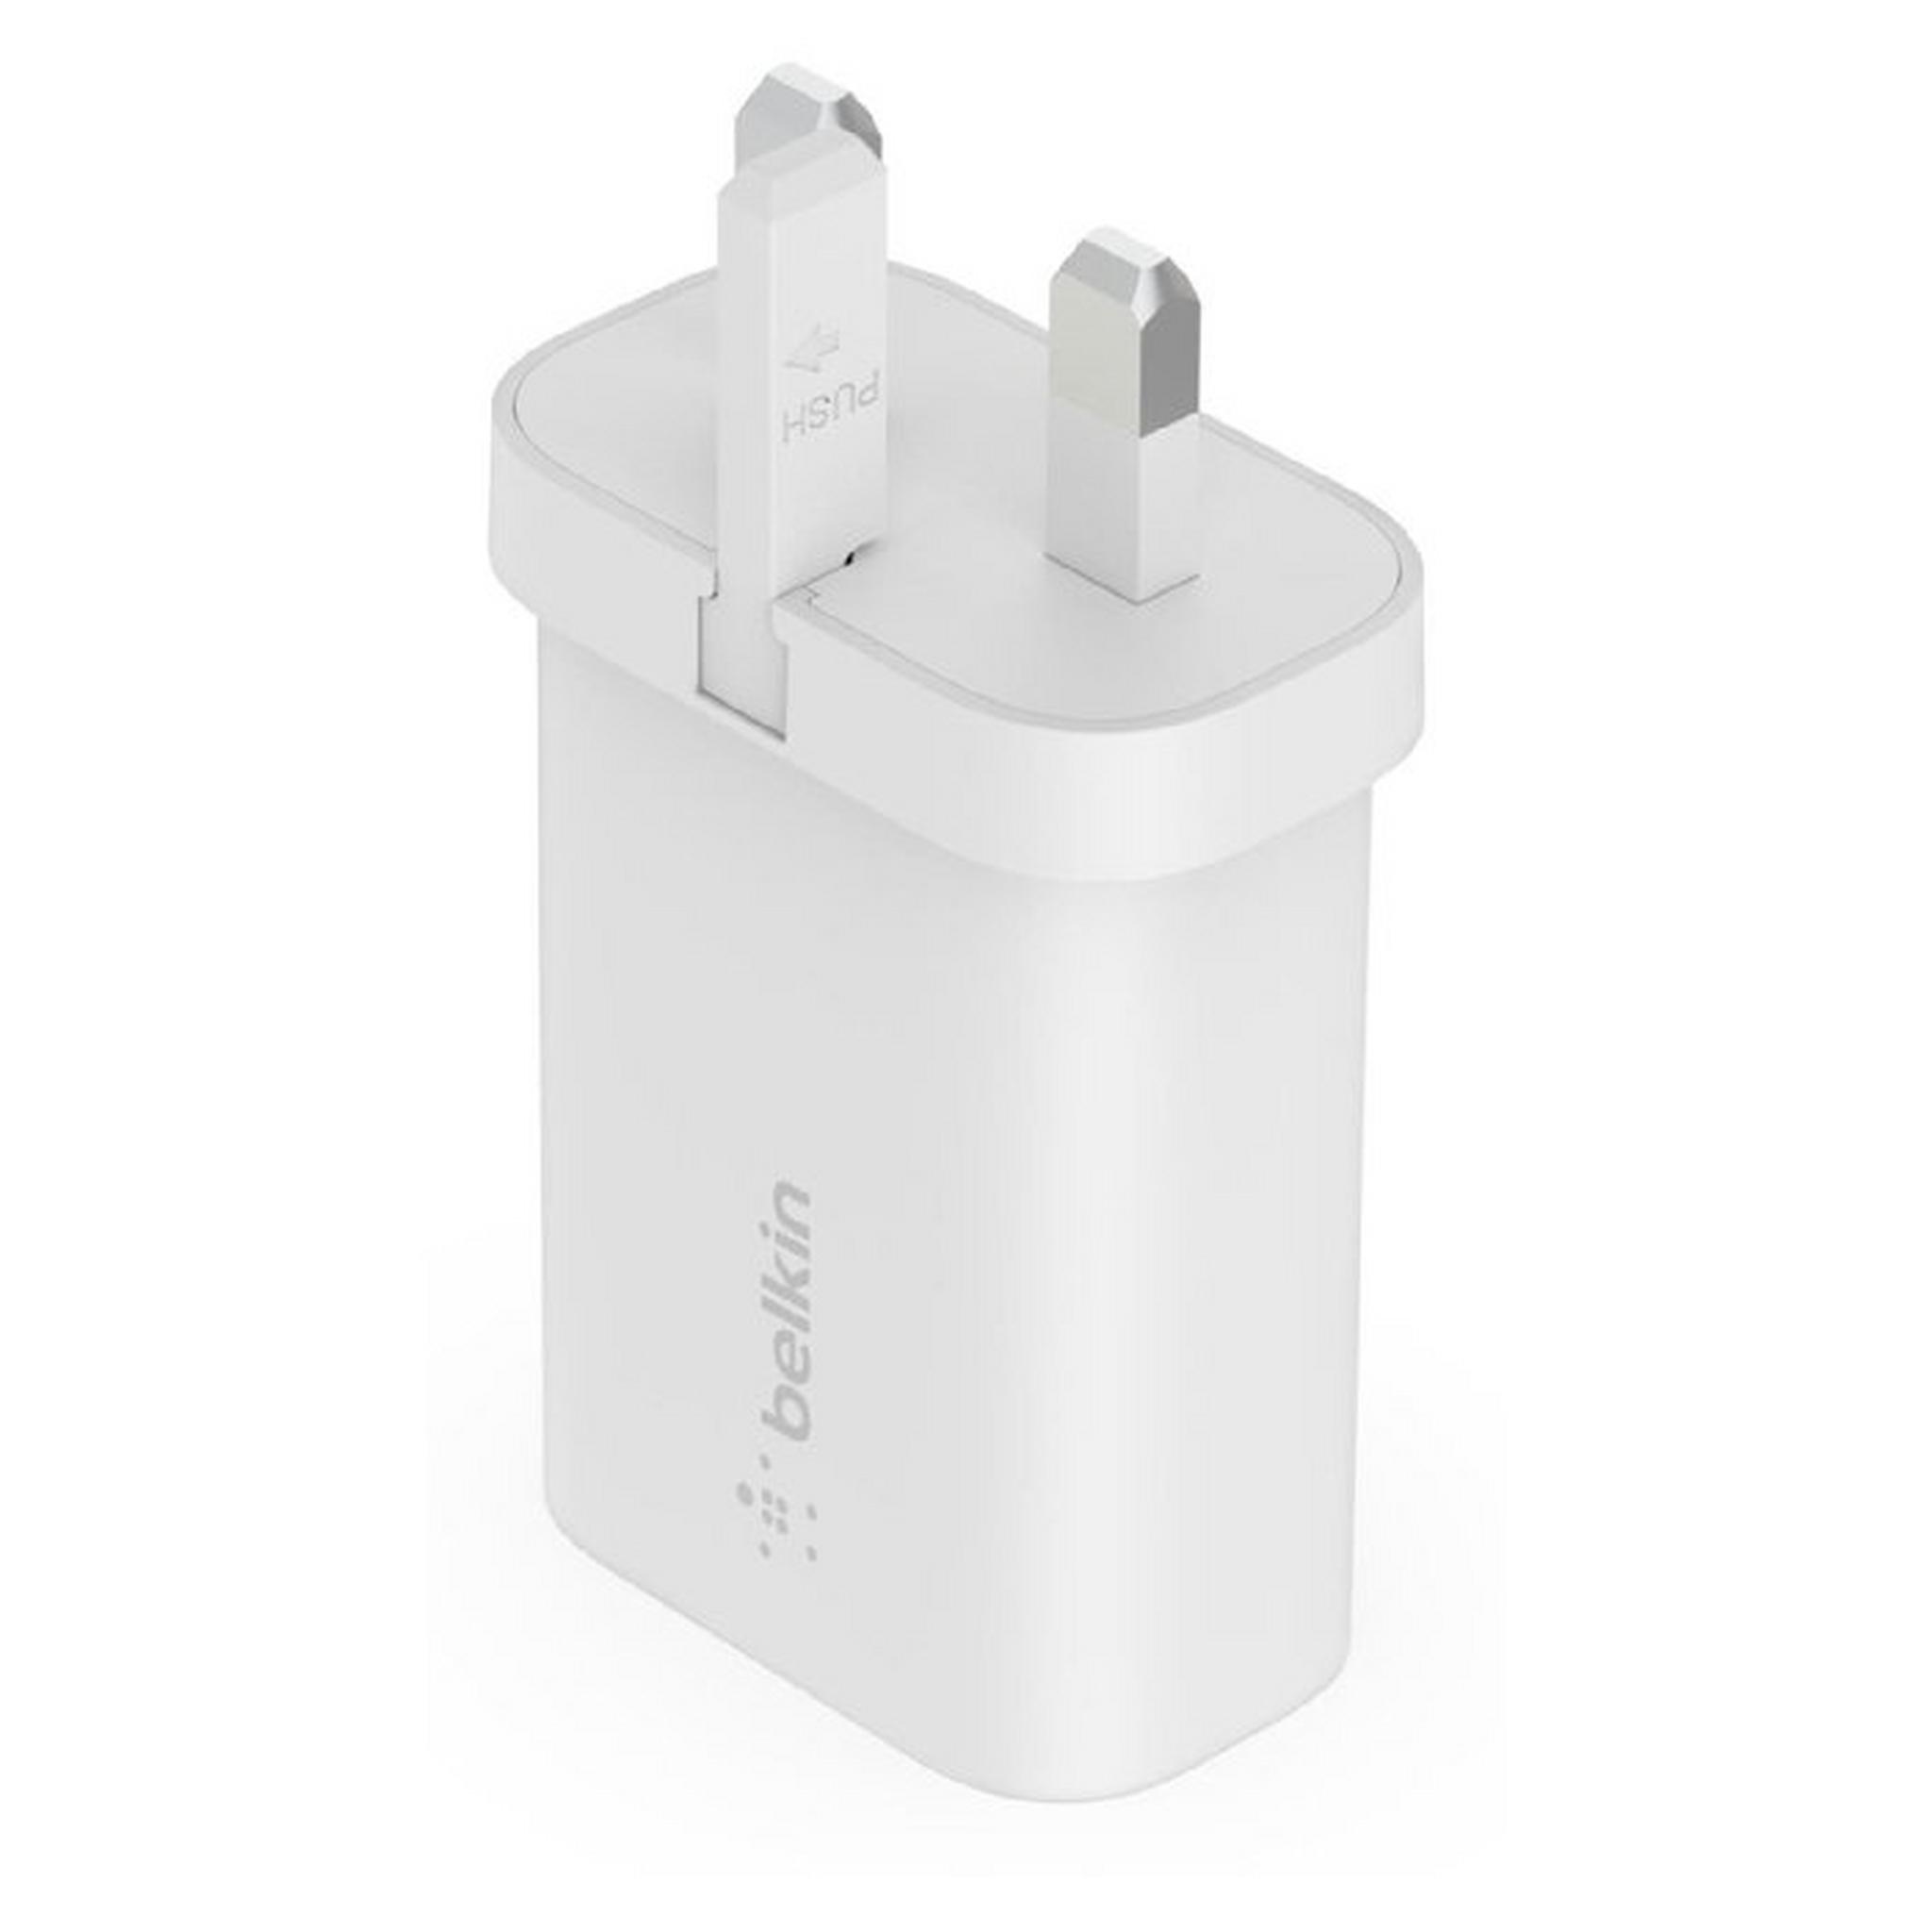 Belkin 25W USB-C Wall Charger - White